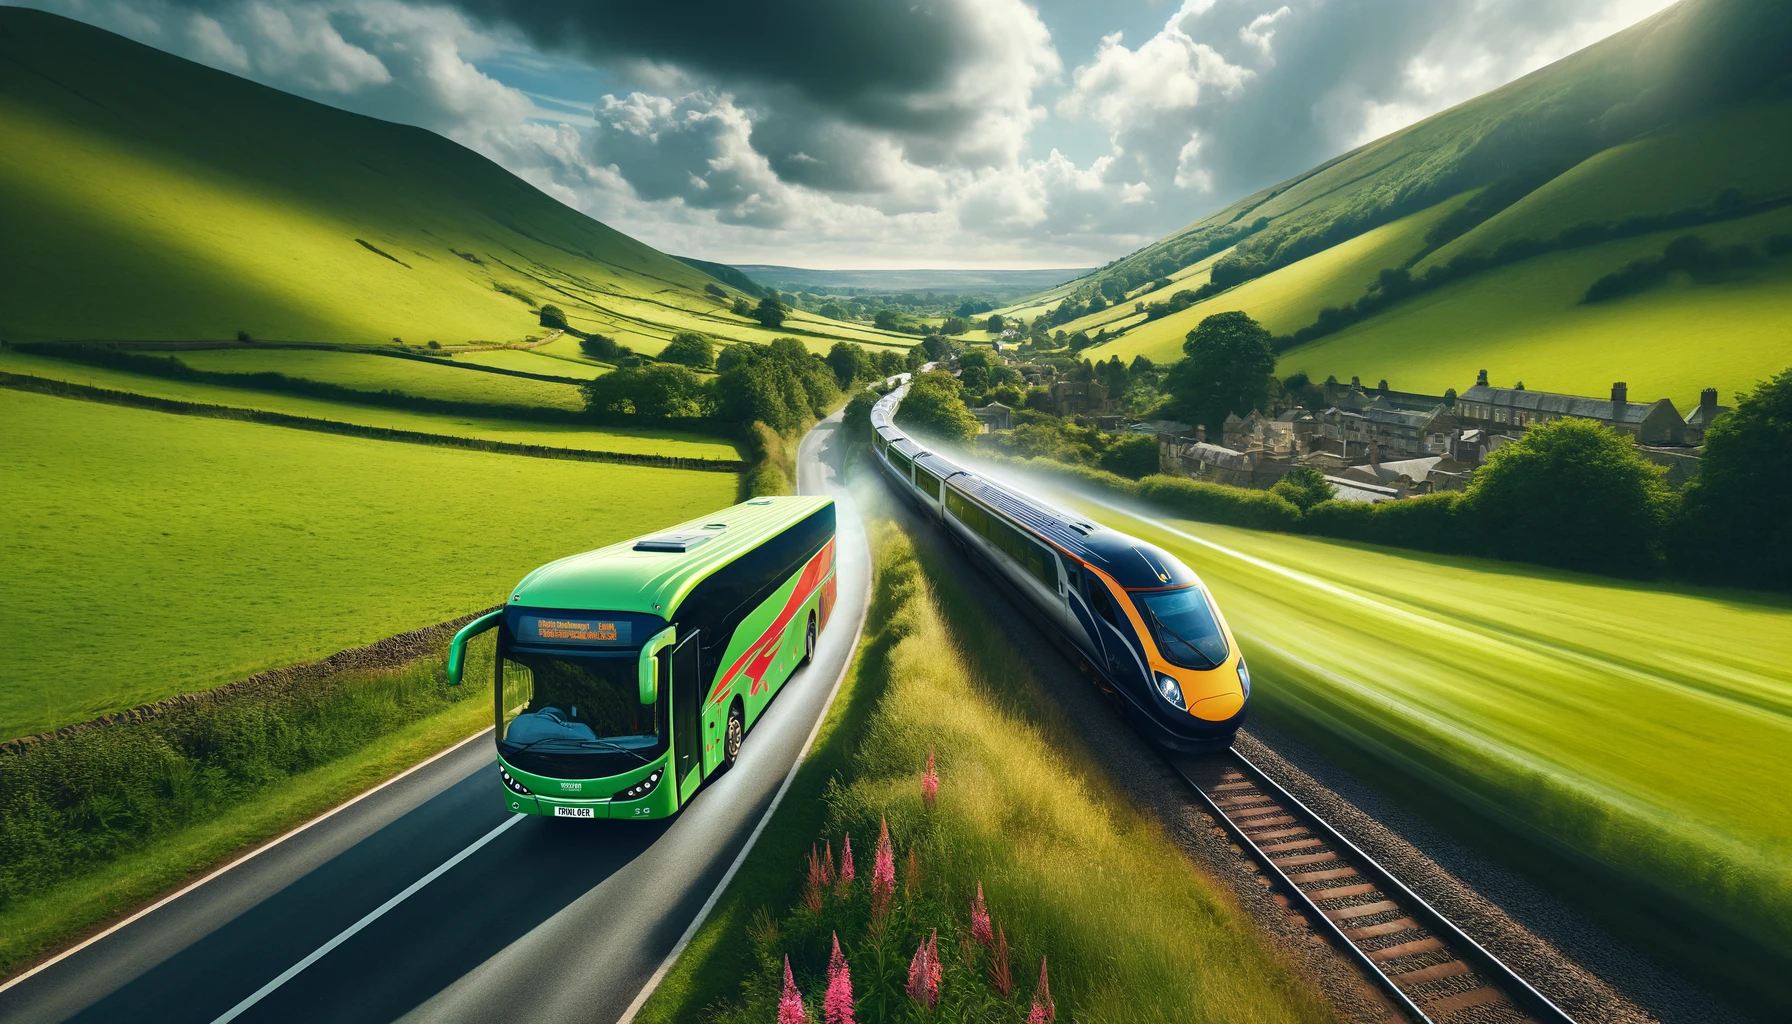 An illustration of a modern bus and a sleek train racing side-by-side through a scenic English countryside, featuring rolling green hills and traditional flora. The bus travels on a winding road while the train speeds along a parallel railway track.